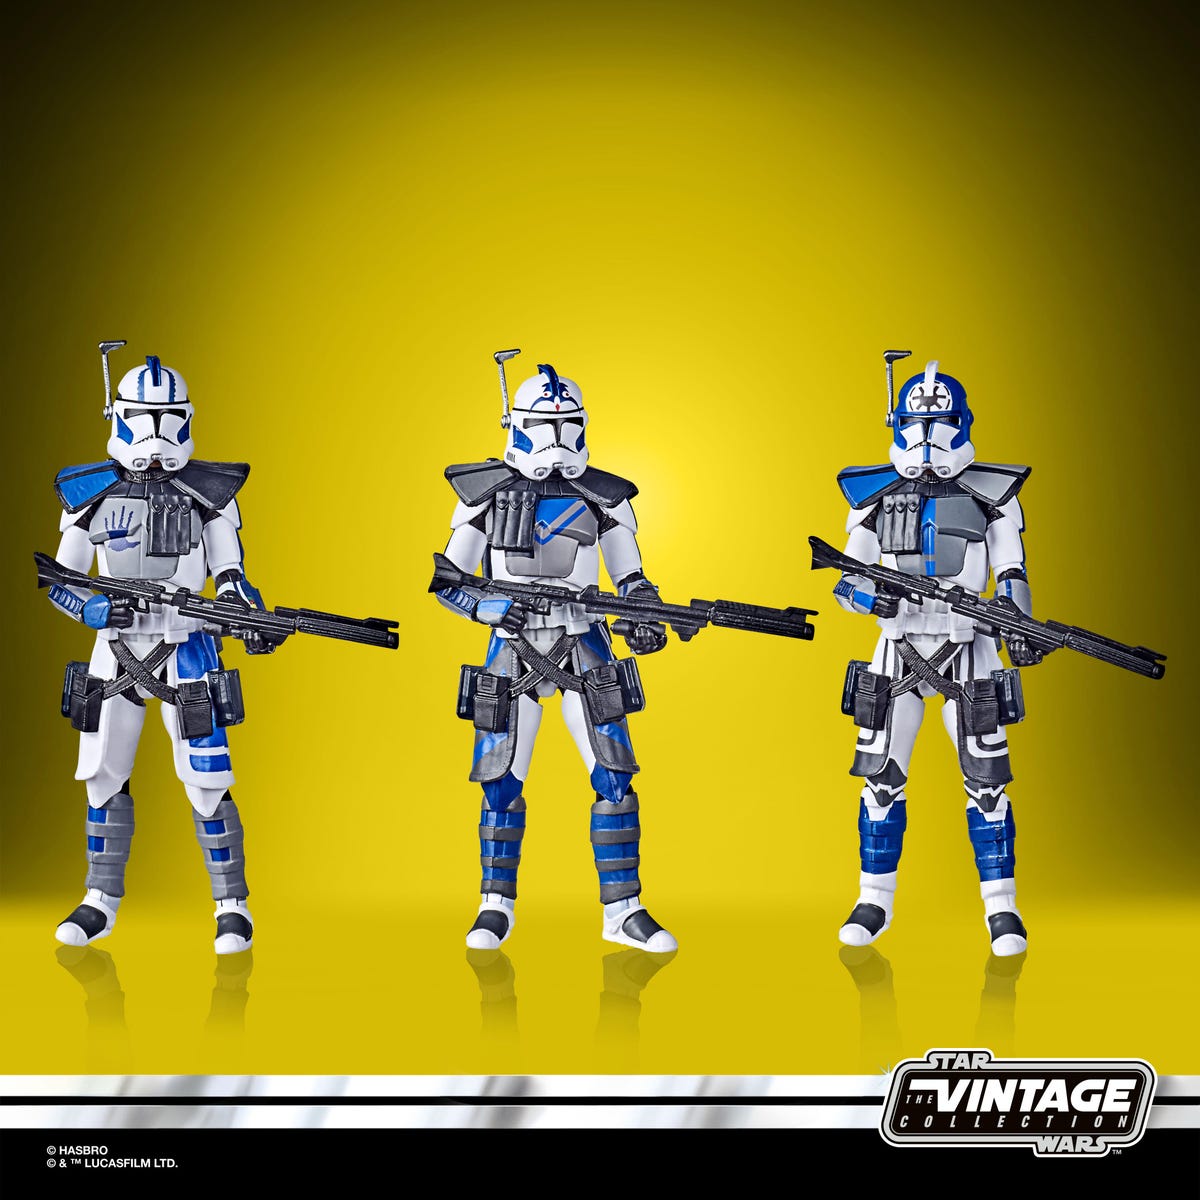 star-wars-the-vintage-collection-star-wars-the-clone-wars-501st-legion-arc-troopers-figure-3-pack-oop-1